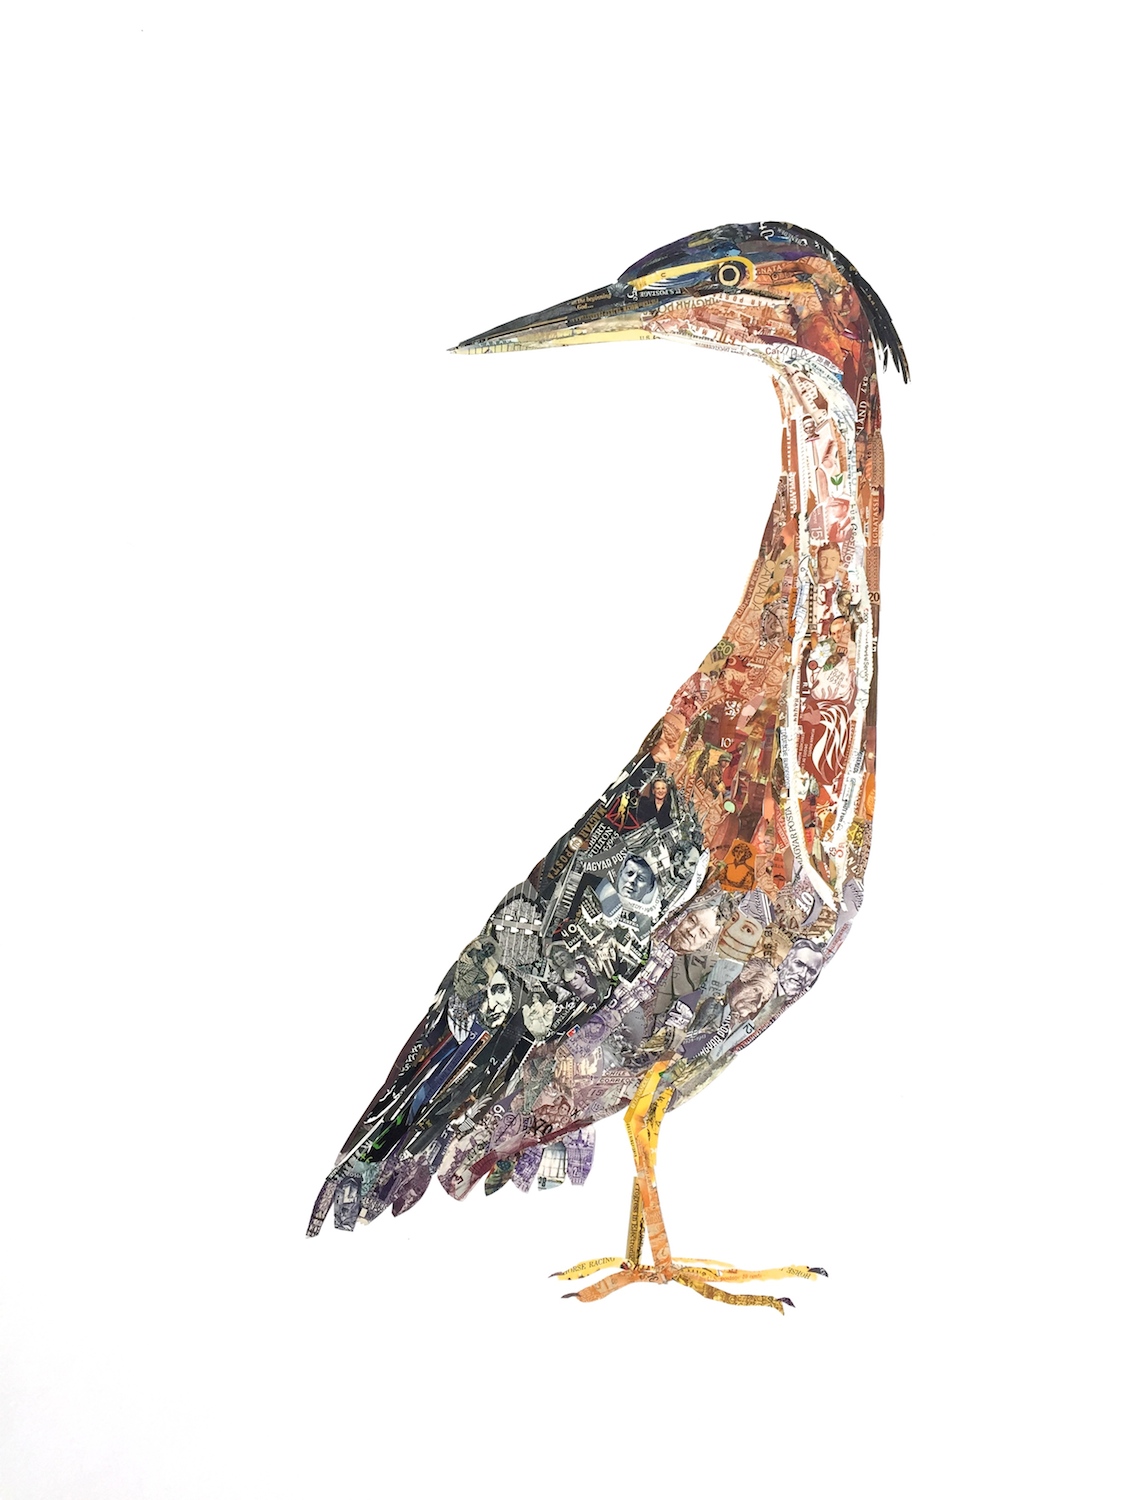 Kerry Buchman, Green Heron, 2015. Postage stamps on paper, 23.5 x 18 in.